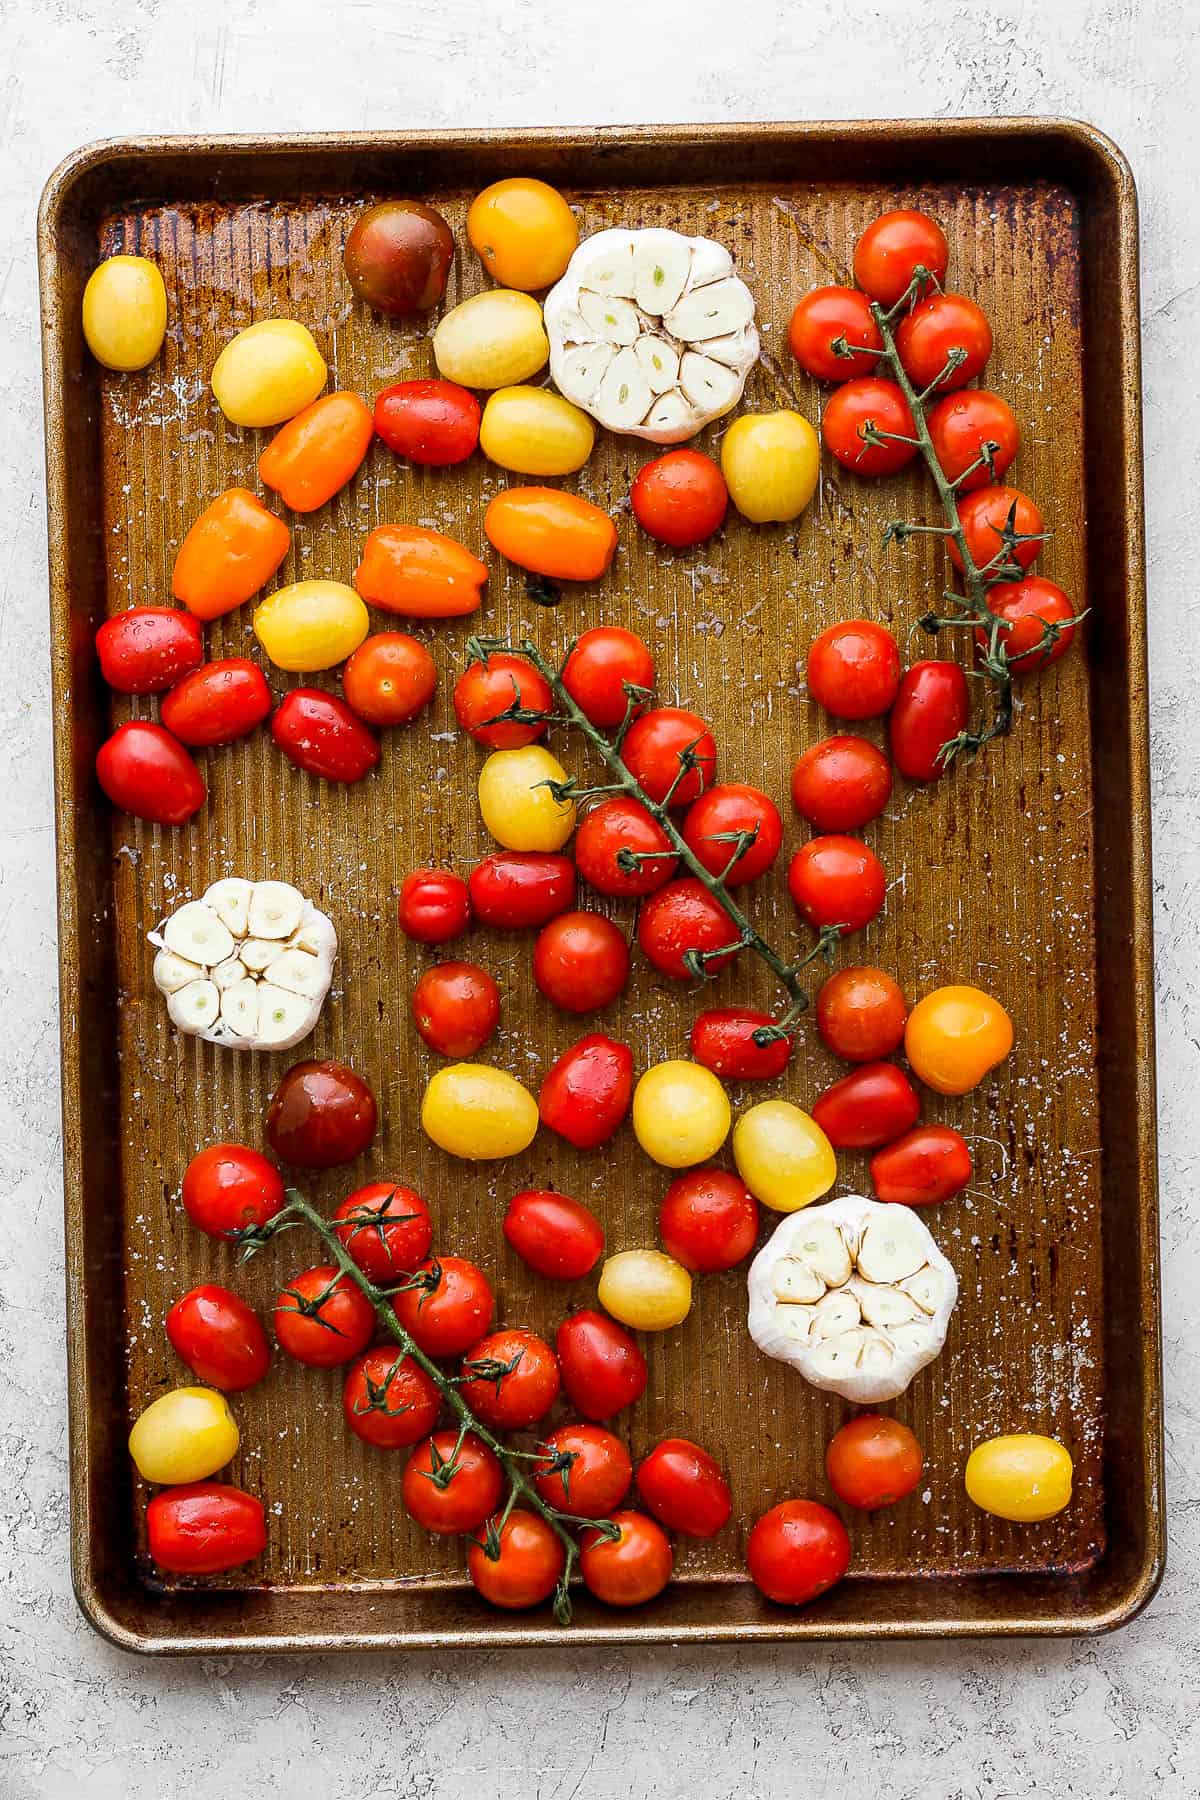 Cherry tomatoes on a baking sheet drizzled with olive oil and sprinkled with salt and pepper.